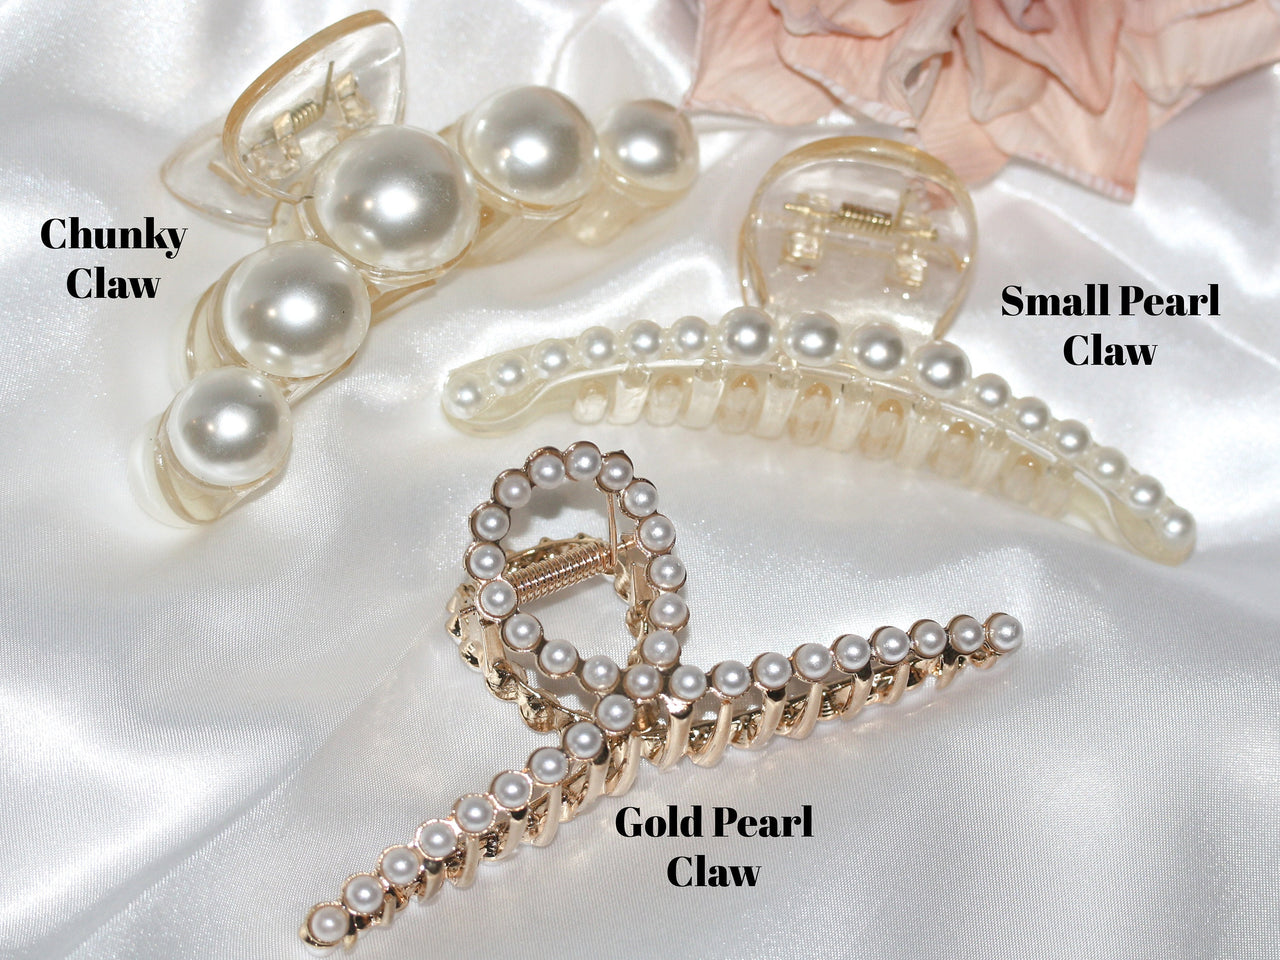 To have and to hold your hair back gift bag with pearl hair claw clip